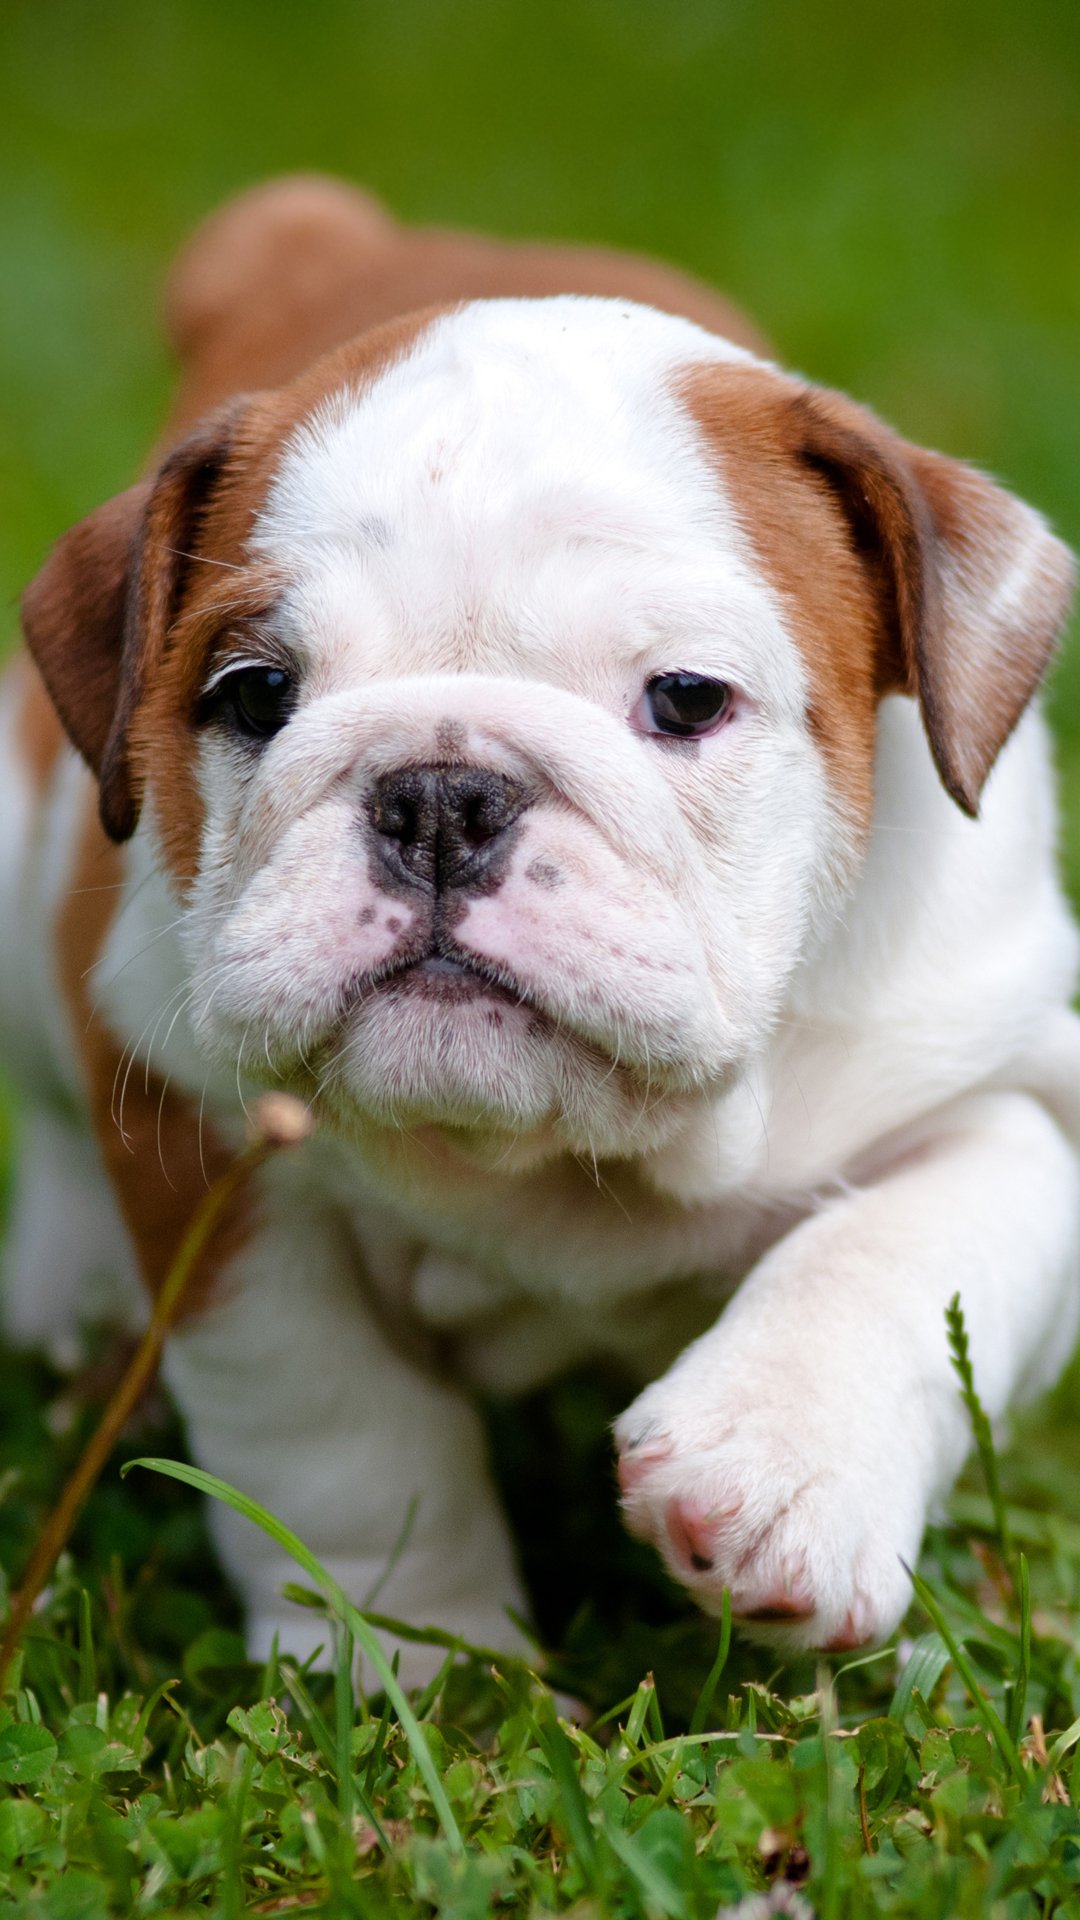 Bulldog puppy htc one wallpaper, free and easy to download